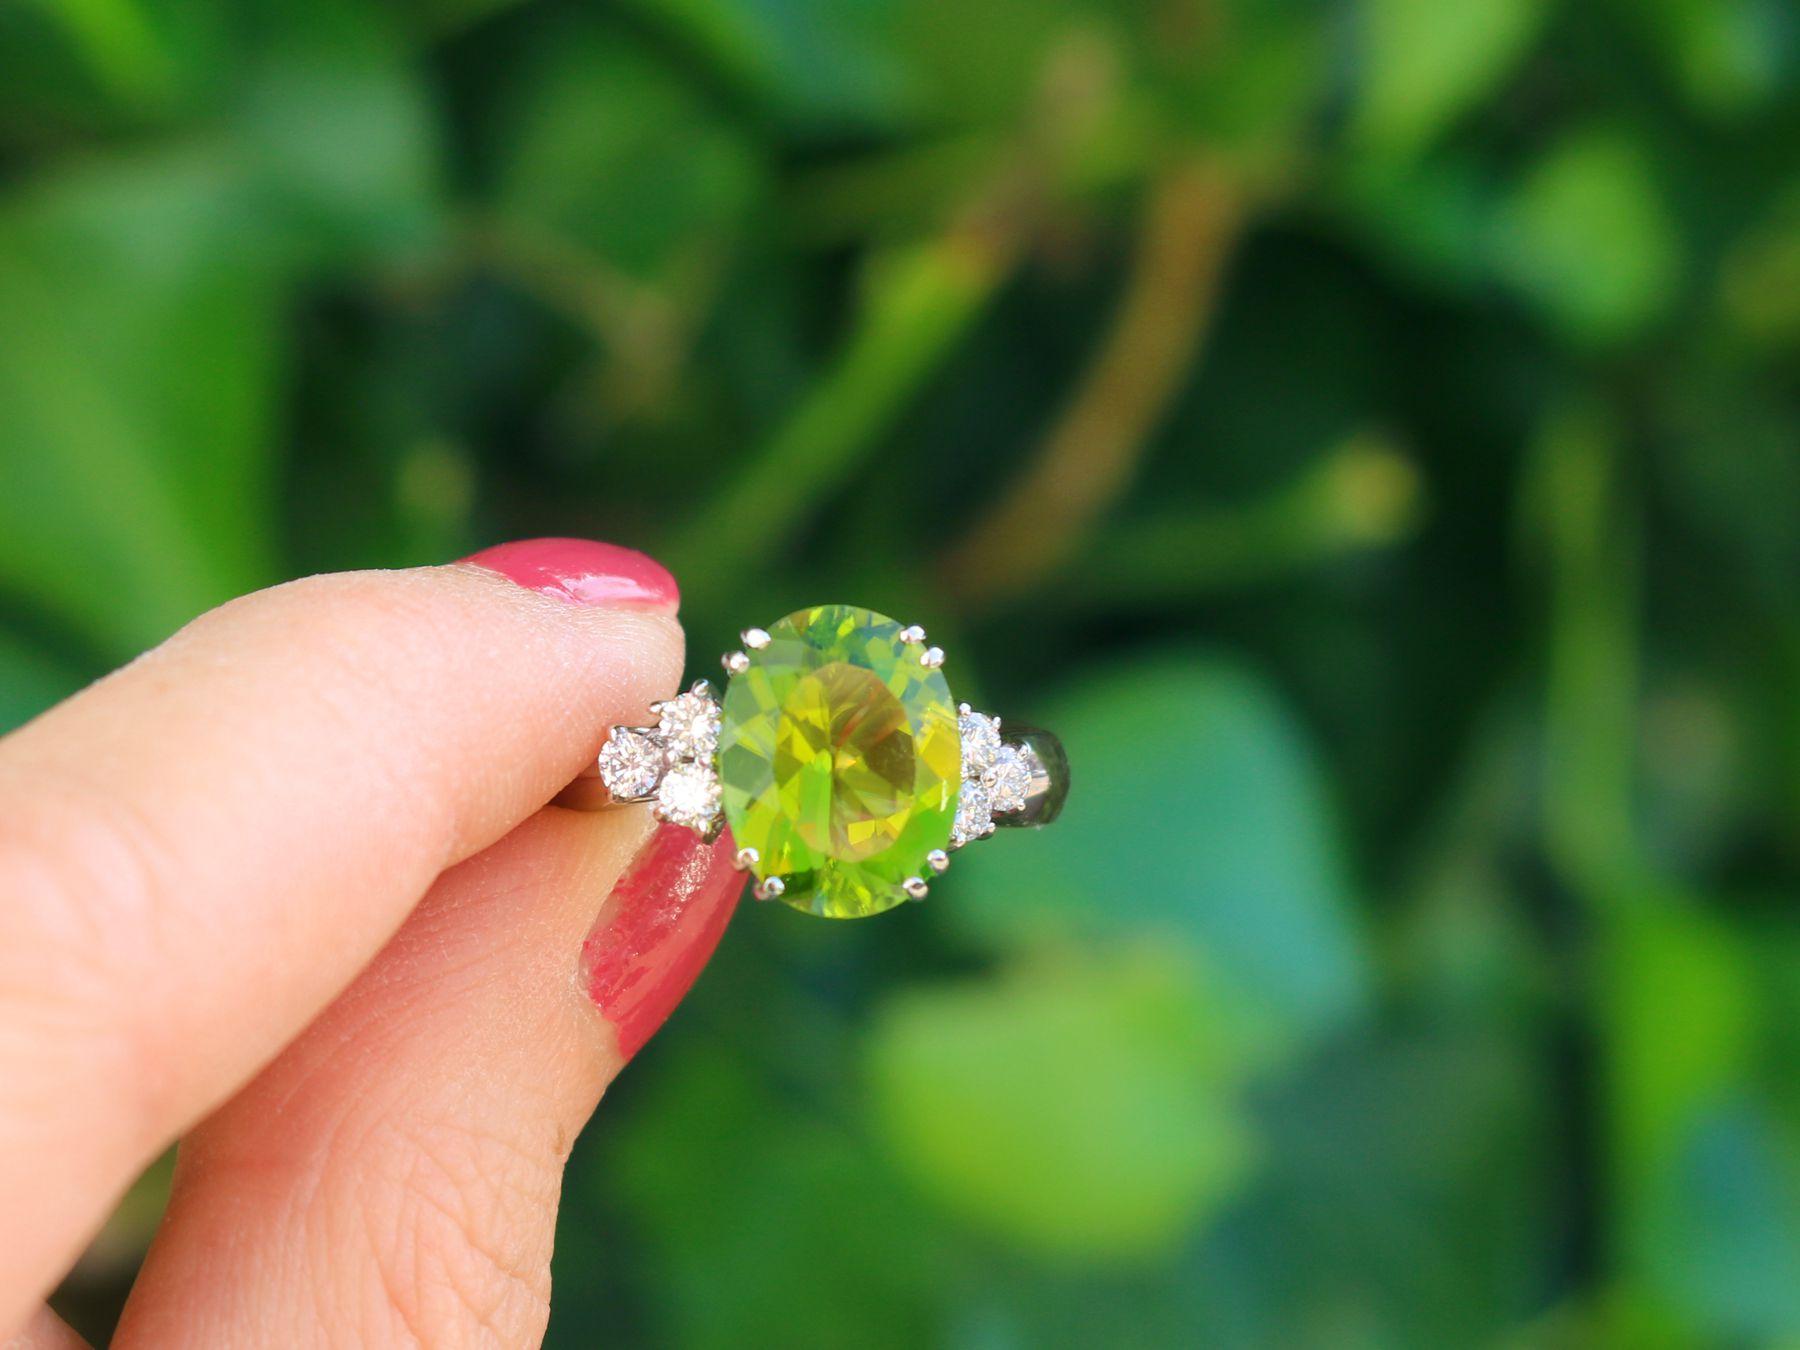 A stunning, fine and impressive vintage 6.84 Carat peridot and 0.48 Carat diamond, 18 karat white gold dress ring; part of our diverse gemstone jewelry and estate jewelry collections.

This stunning, fine and impressive vintage ring has been crafted